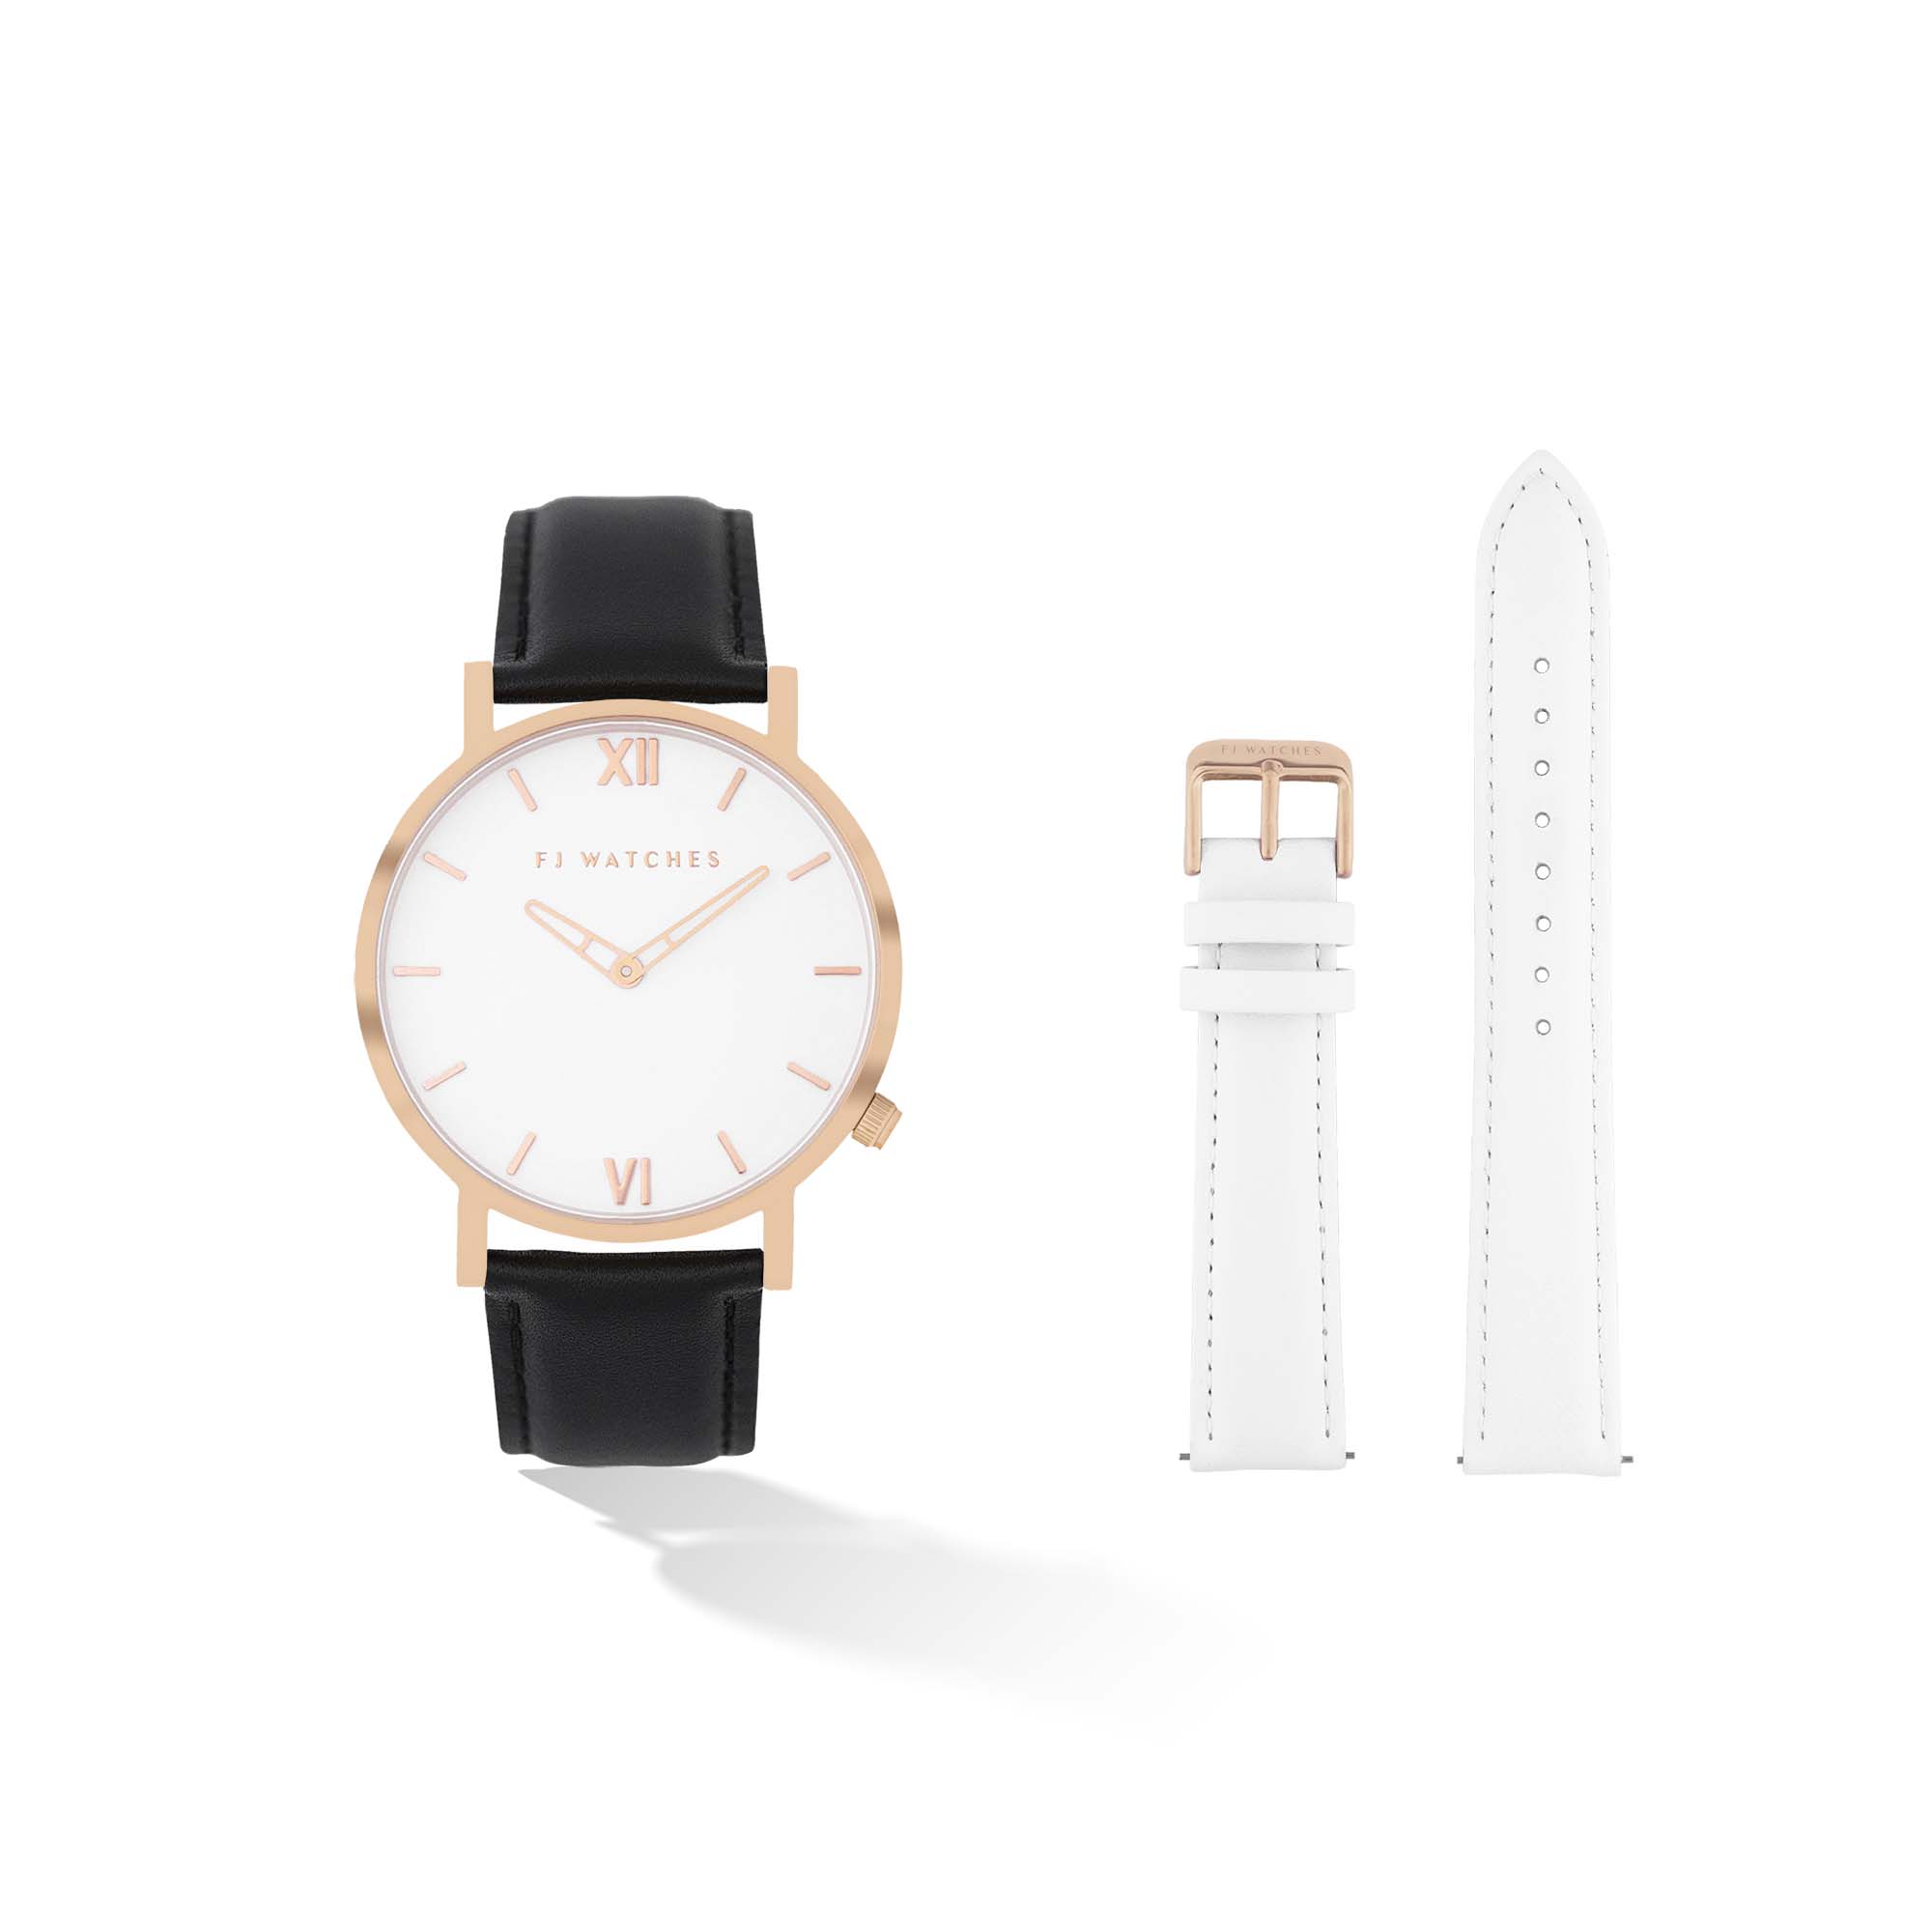 Discover the Golden Sun set, a 36mm men and women watch from Five Jwlry. Equipped with a minimalist white and rose gold dial. In this special edition, this watch comes with two leathers, one black leather and one white. The perfect gift!